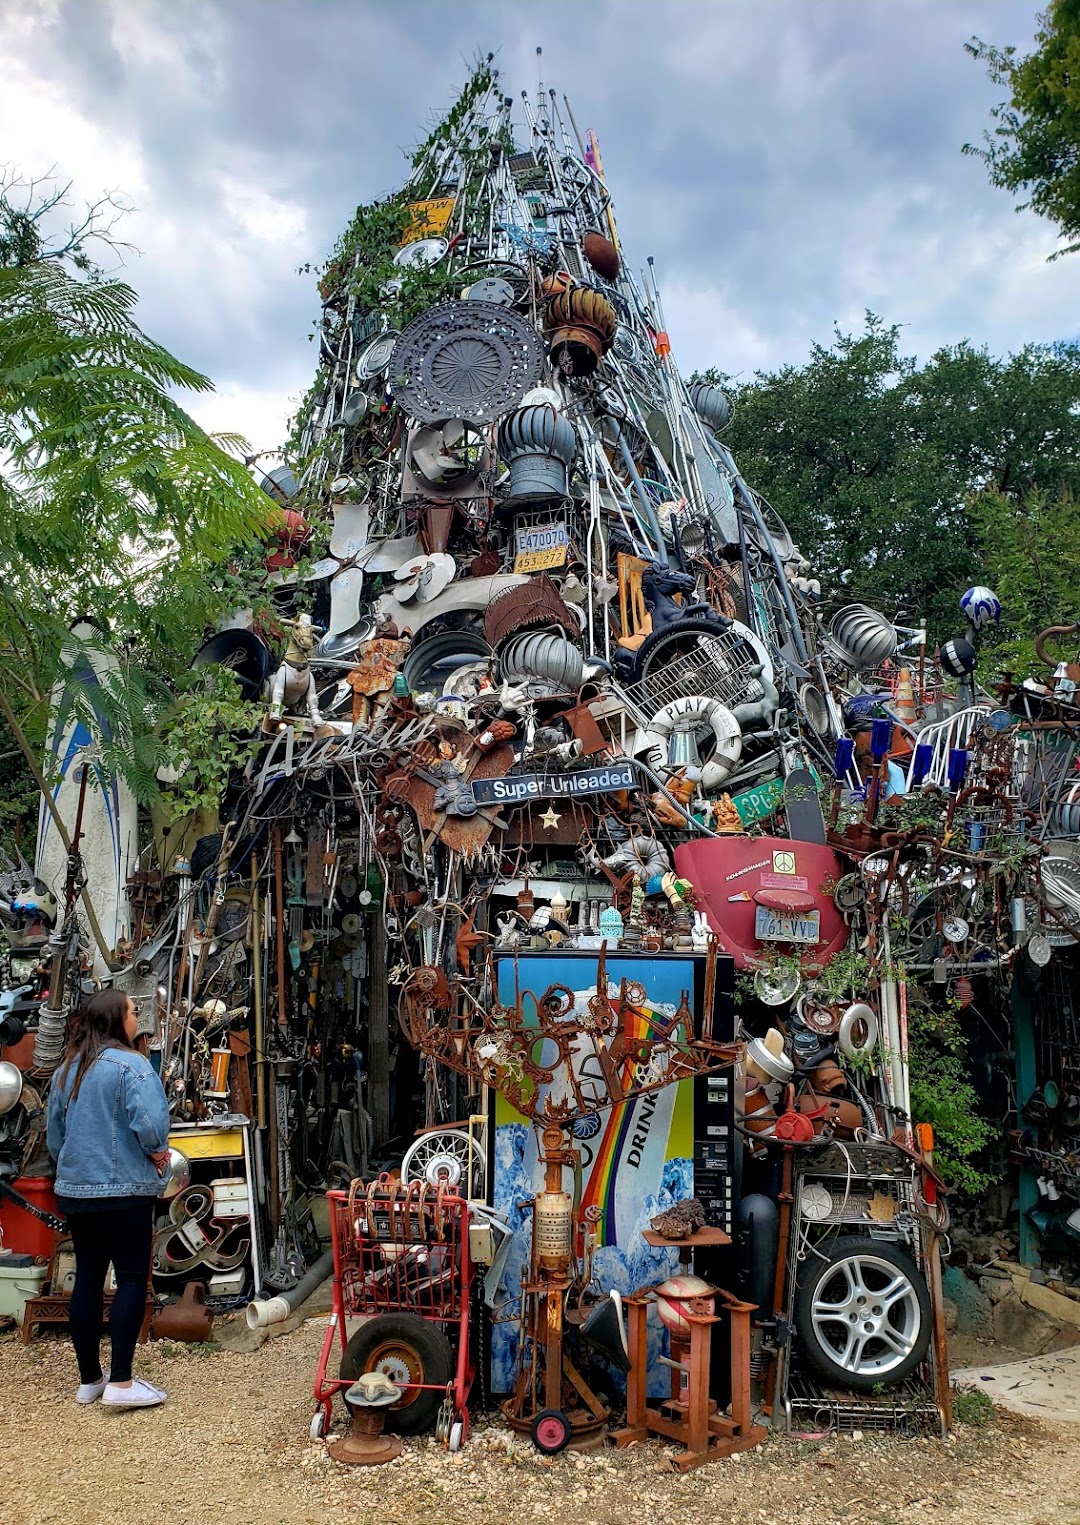 Cathedral of Junk